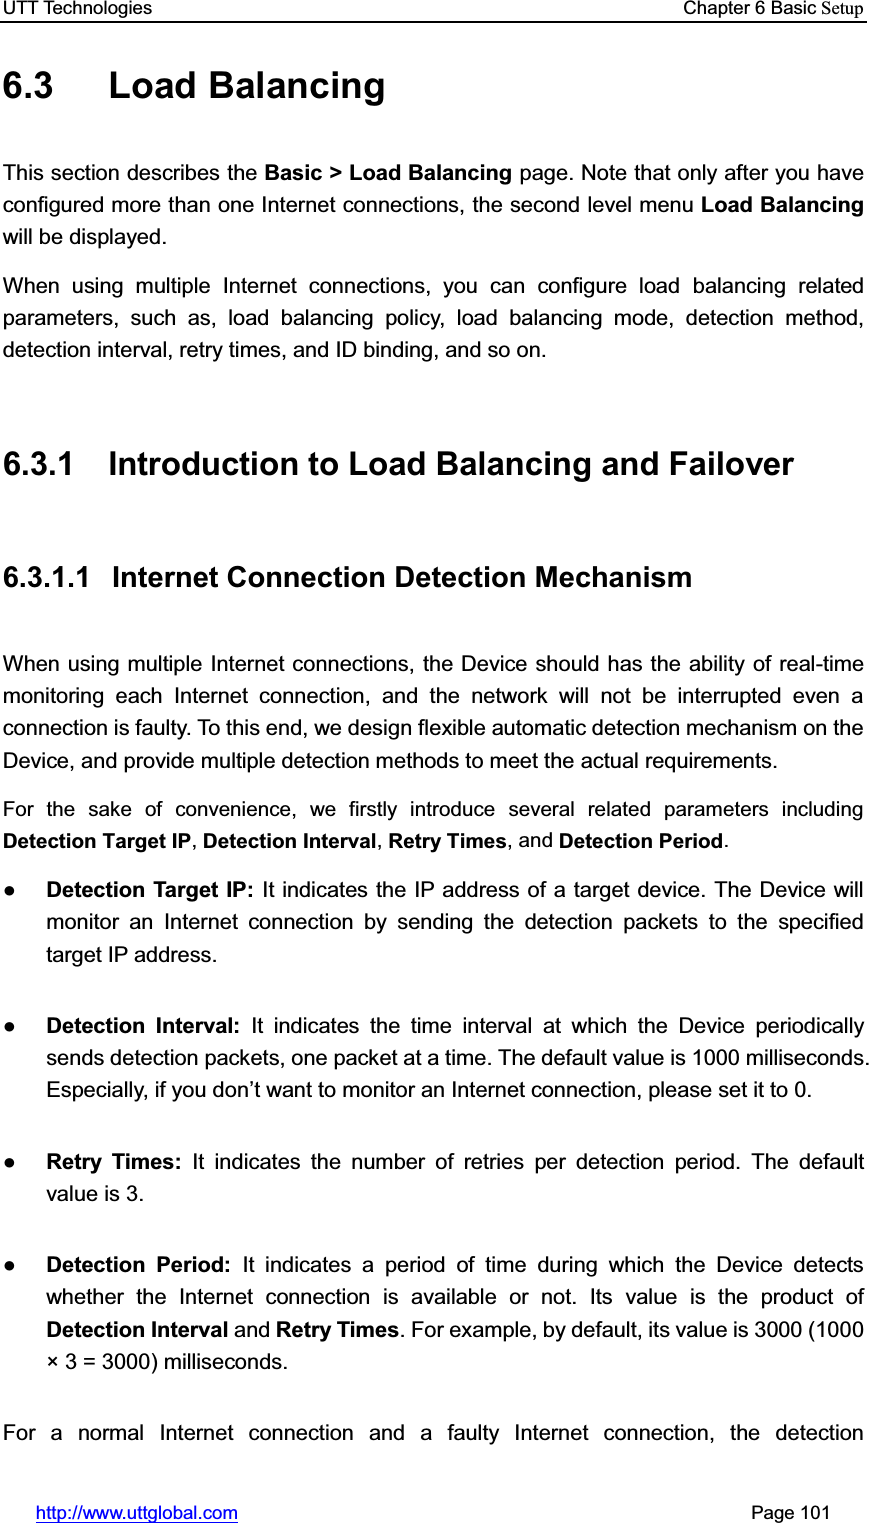 UTT Technologies    Chapter 6 Basic Setuphttp://www.uttglobal.com                                                       Page 101 6.3 Load Balancing  This section describes the Basic &gt; Load Balancing page. Note that only after you have configured more than one Internet connections, the second level menu Load Balancingwill be displayed. When using multiple Internet connections, you can configure load balancing related parameters, such as, load balancing policy, load balancing mode, detection method, detection interval, retry times, and ID binding, and so on. 6.3.1  Introduction to Load Balancing and Failover 6.3.1.1  Internet Connection Detection Mechanism When using multiple Internet connections, the Device should has the ability of real-time monitoring each Internet connection, and the network will not be interrupted even a connection is faulty. To this end, we design flexible automatic detection mechanism on the Device, and provide multiple detection methods to meet the actual requirements.   For the sake of convenience, we firstly introduce several related parameters including Detection Target IP,Detection Interval,Retry Times, and Detection Period.ƔDetection Target IP: It indicates the IP address of a target device. The Device will monitor an Internet connection by sending the detection packets to the specified target IP address. ƔDetection Interval: It indicates the time interval at which the Device periodically sends detection packets, one packet at a time. The default value is 1000 milliseconds. Especially, if you don¶t want to monitor an Internet connection, please set it to 0.   ƔRetry Times: It indicates the number of retries per detection period. The default value is 3. ƔDetection Period: It indicates a period of time during which the Device detects whether the Internet connection is available or not. Its value is the product of Detection Interval and Retry Times. For example, by default, its value is 3000 (1000 × 3 = 3000) milliseconds.   For a normal Internet connection and a faulty Internet connection, the detection 